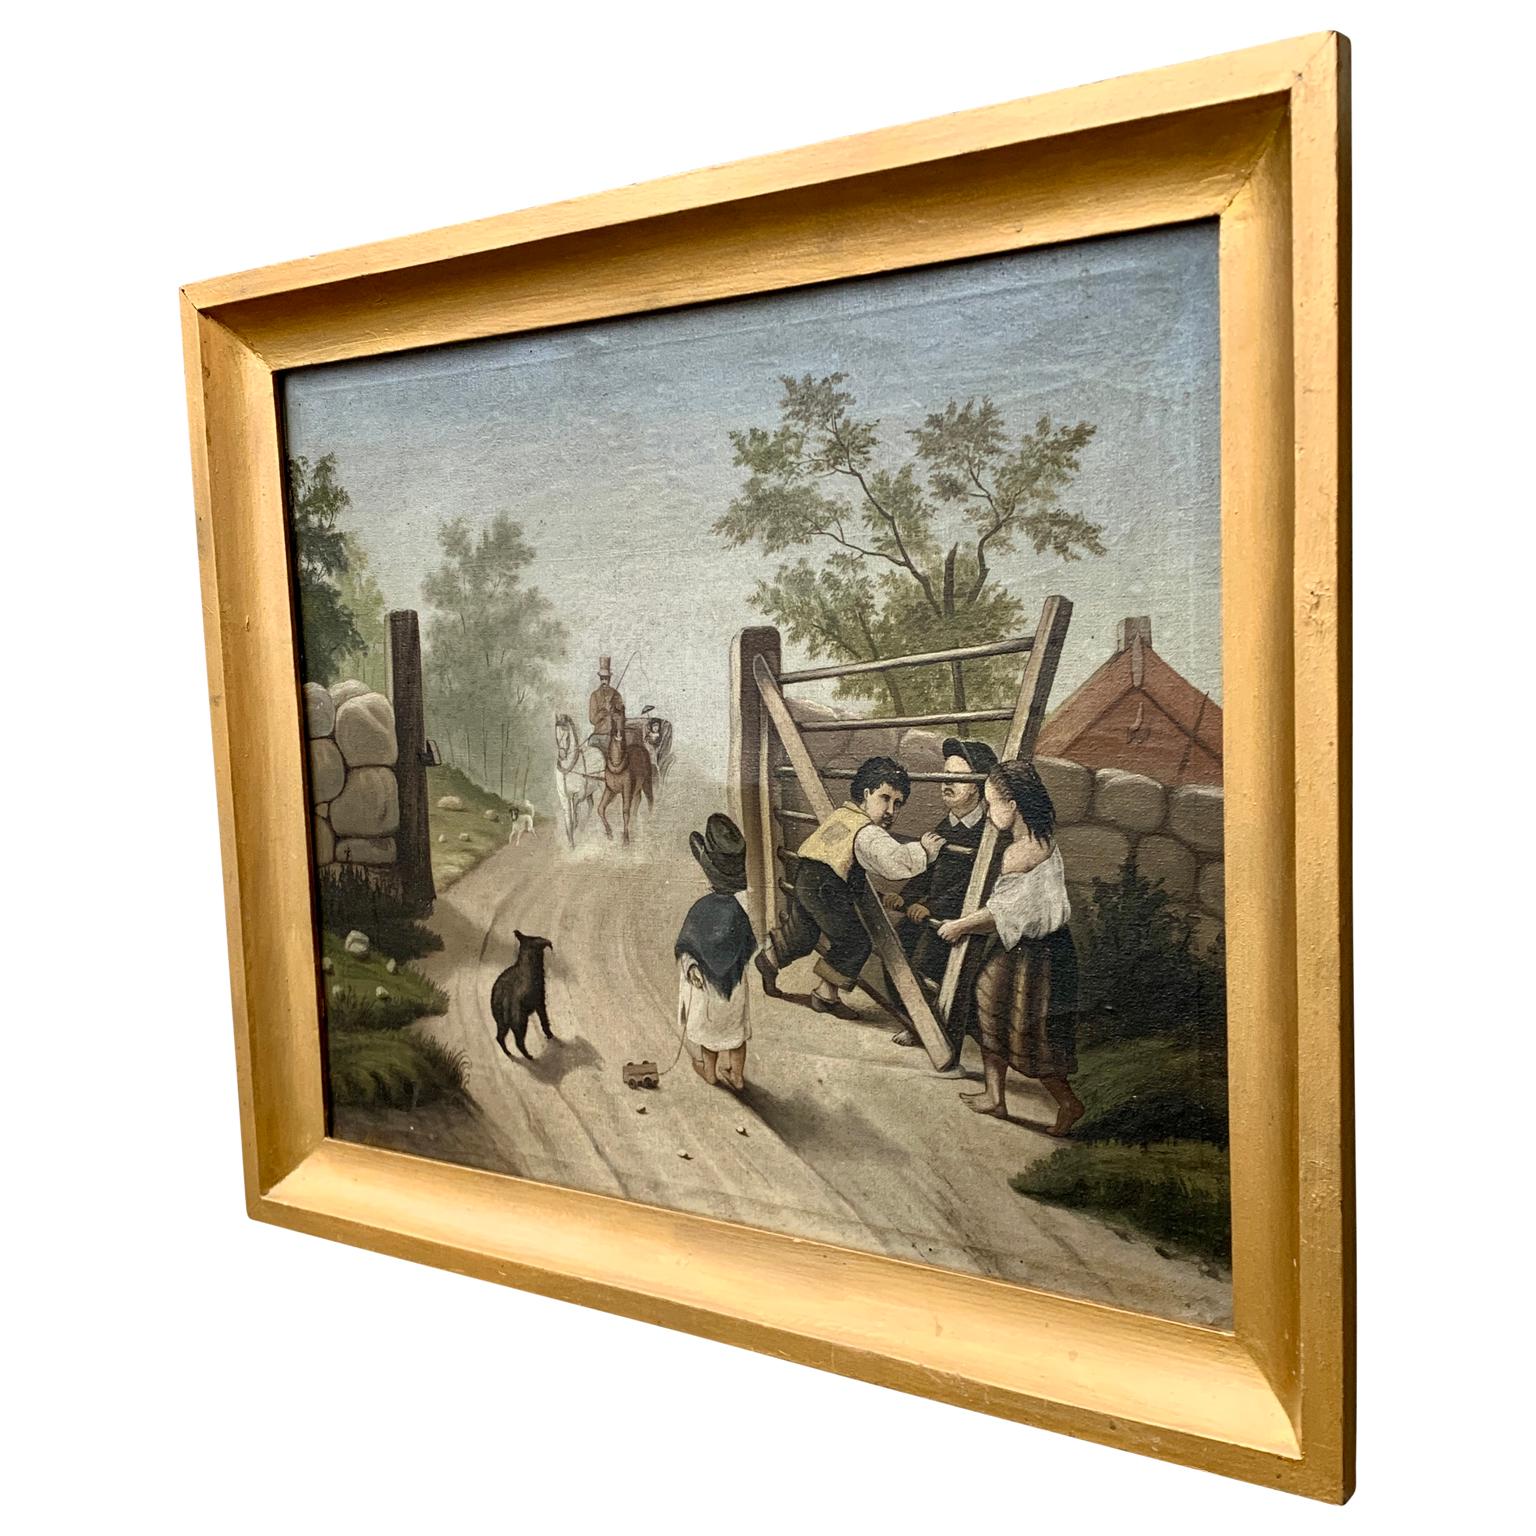 Swedish 19th Century Folk Art Oil Painting With Kids In Good Condition For Sale In Haddonfield, NJ